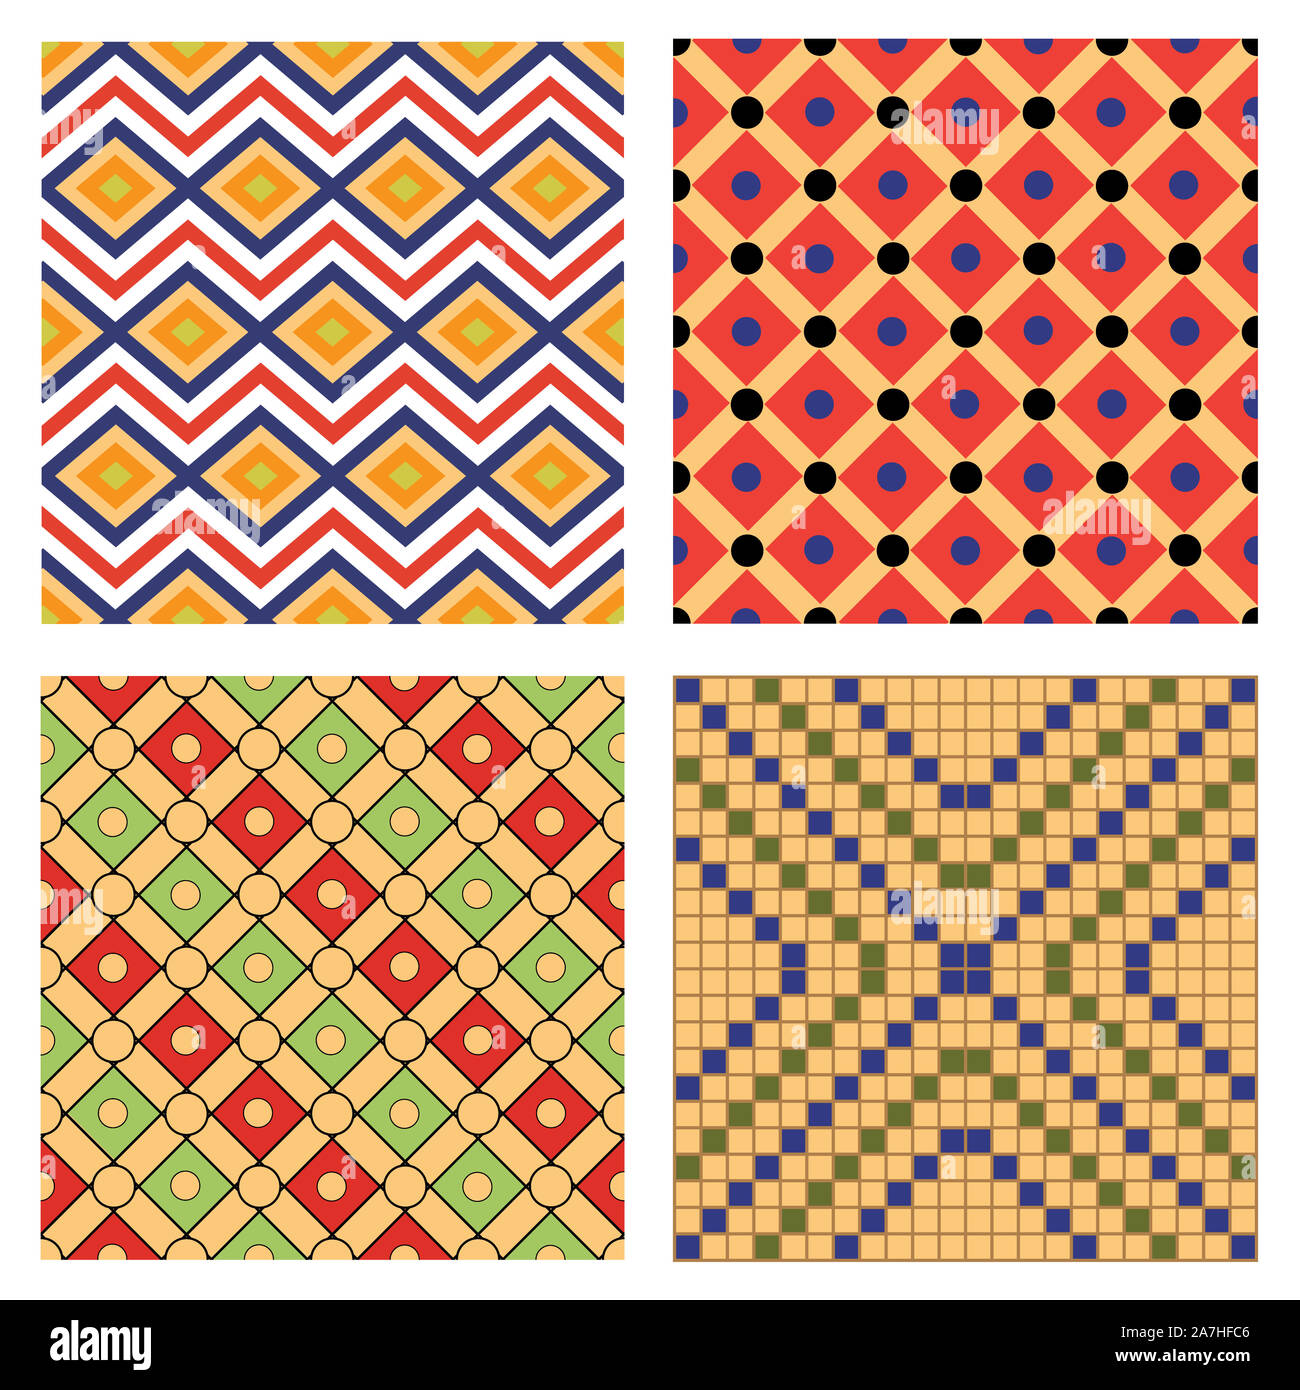 Egypt national ornament pattern volume 3. Egyptian decorative textile elements background. African culture fabric design. Stock Photo